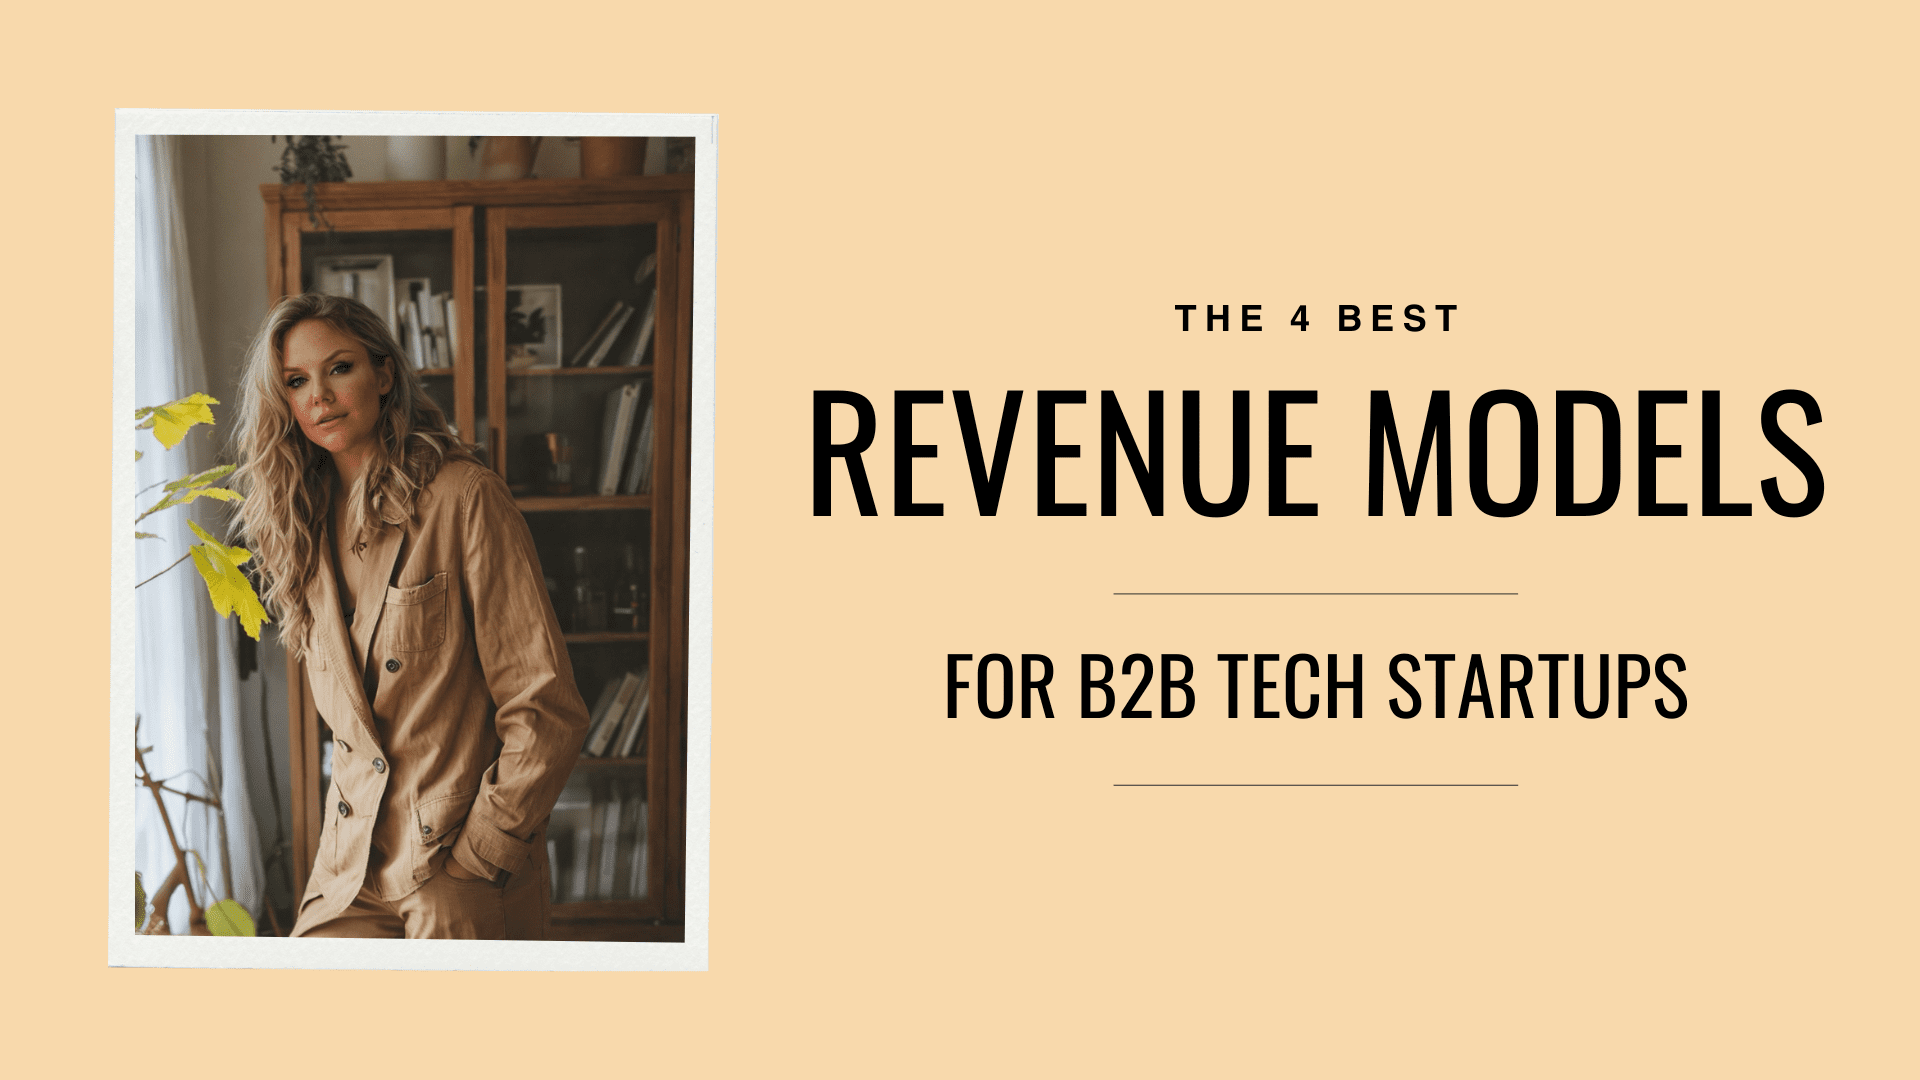 check out these revenue models for startups